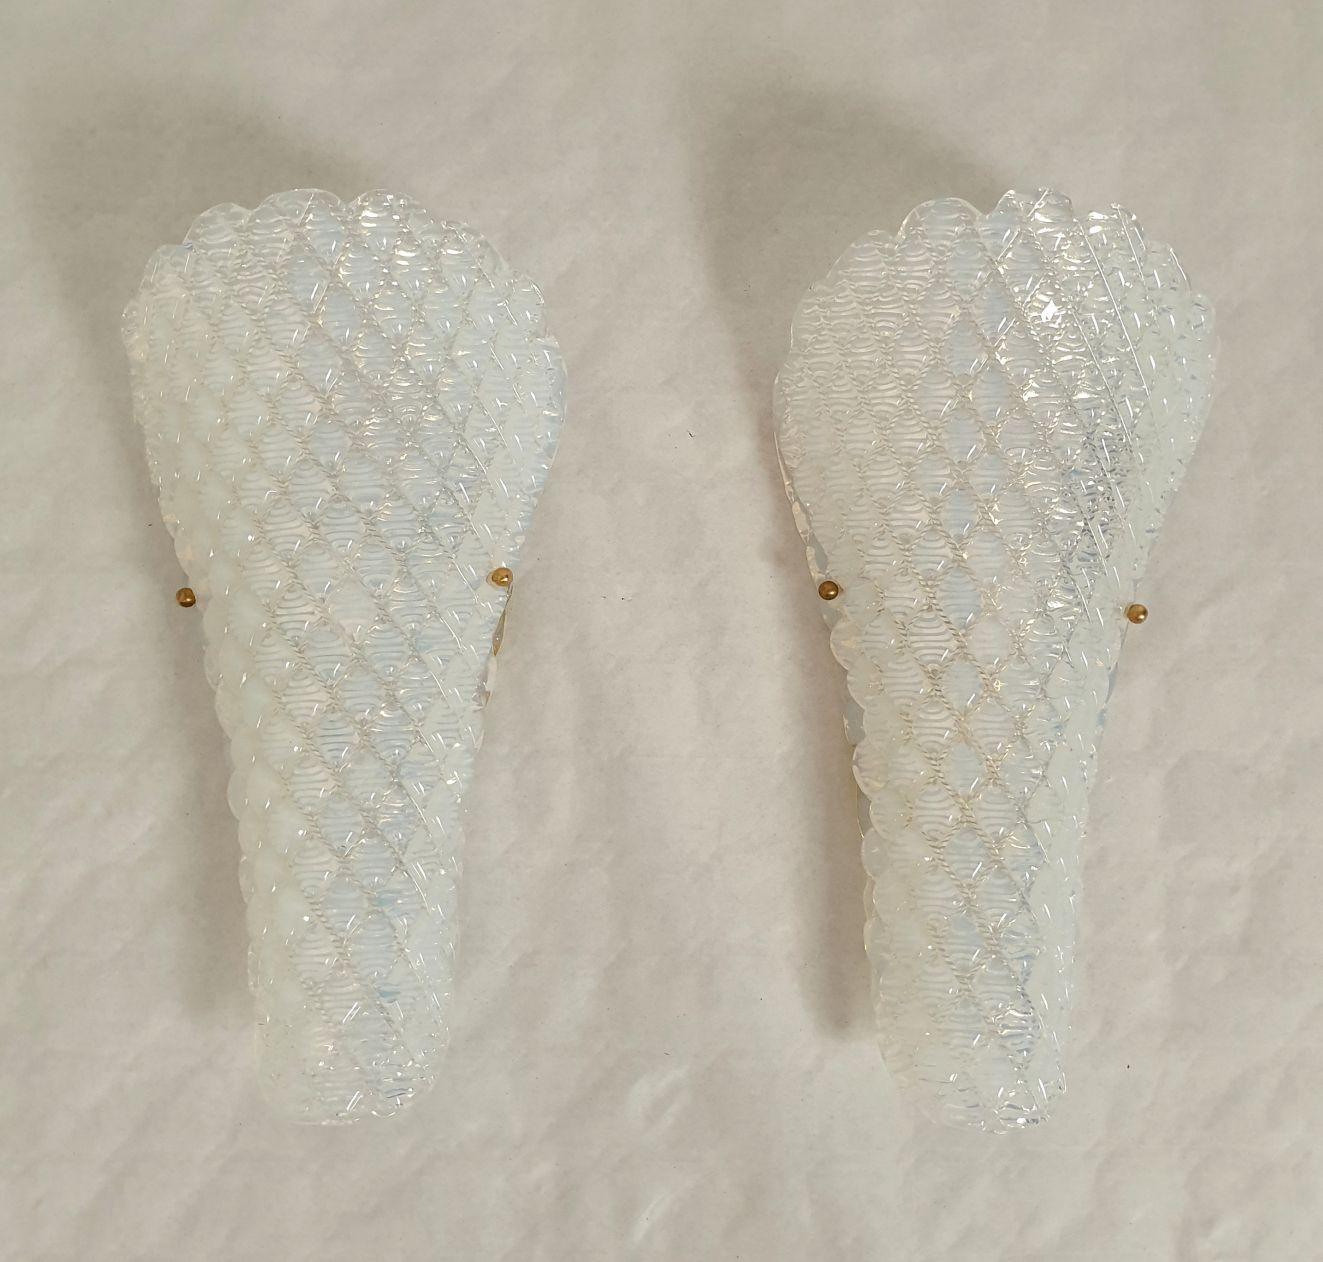 Pair of opaline Murano glass sconces, Mid Century Modern, attributed to Mazzega, Italy 1970s.
Set of three pairs, or six sconces available. Sold and priced by pair.
To inquire about the set of six, select 3 items in the menu.
The Italian sconces are